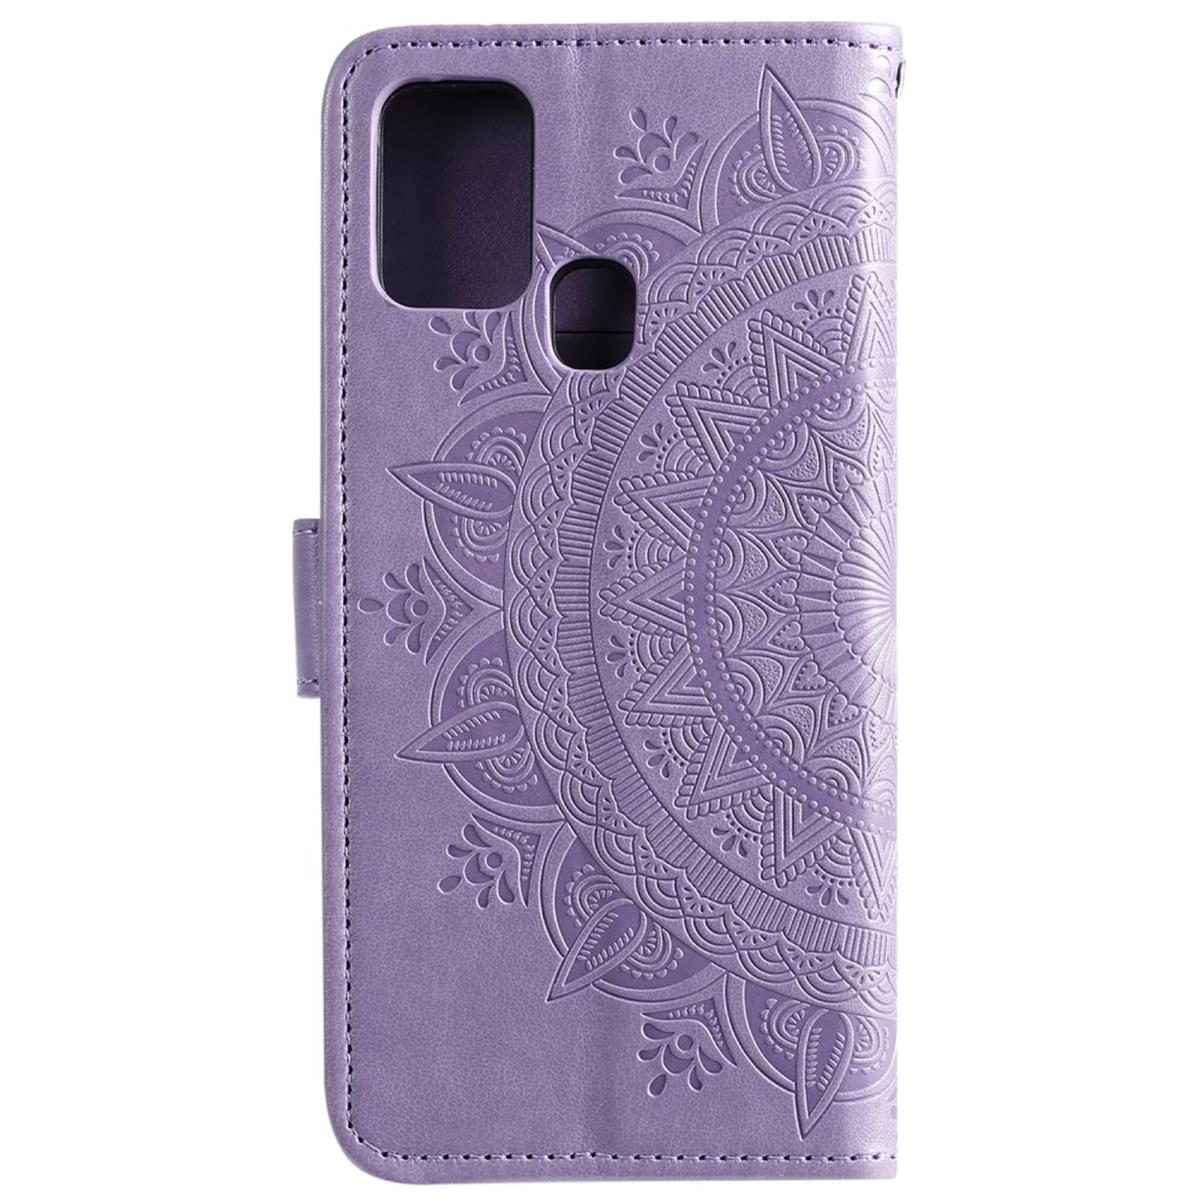 Bookcover, COVERKINGZ Mandala mit Klapphülle Y6p, Huawei, Muster, Lila